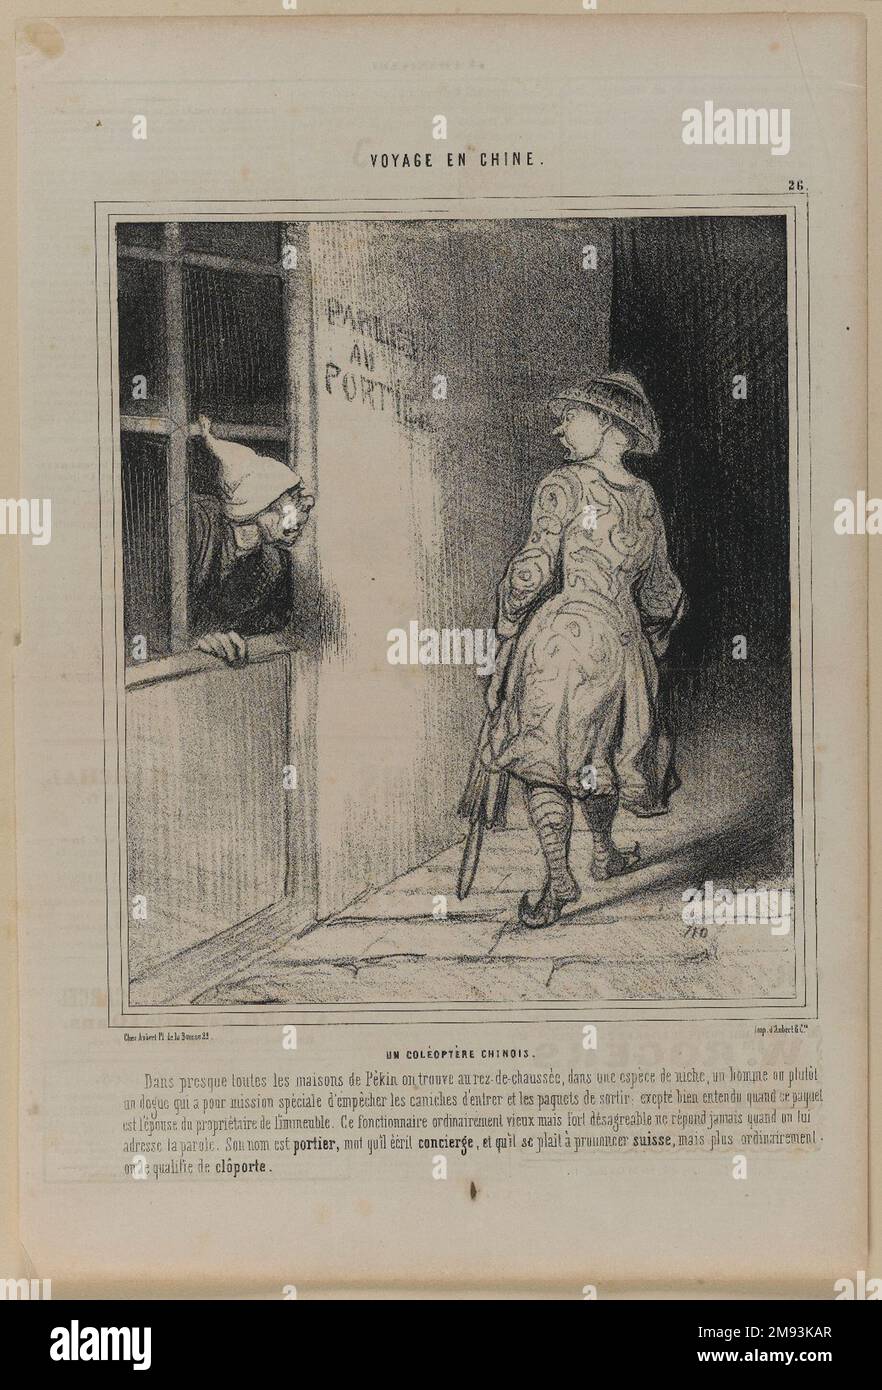 Un Coléoptère Chinois Honoré Daumier (French, 1808-1879). , January 26, 1845. Lithograph on newsprint, Sheet: 14 1/4 x 9 11/16 in. (36.2 x 24.6 cm).   European Art January 26, 1845 Stock Photo